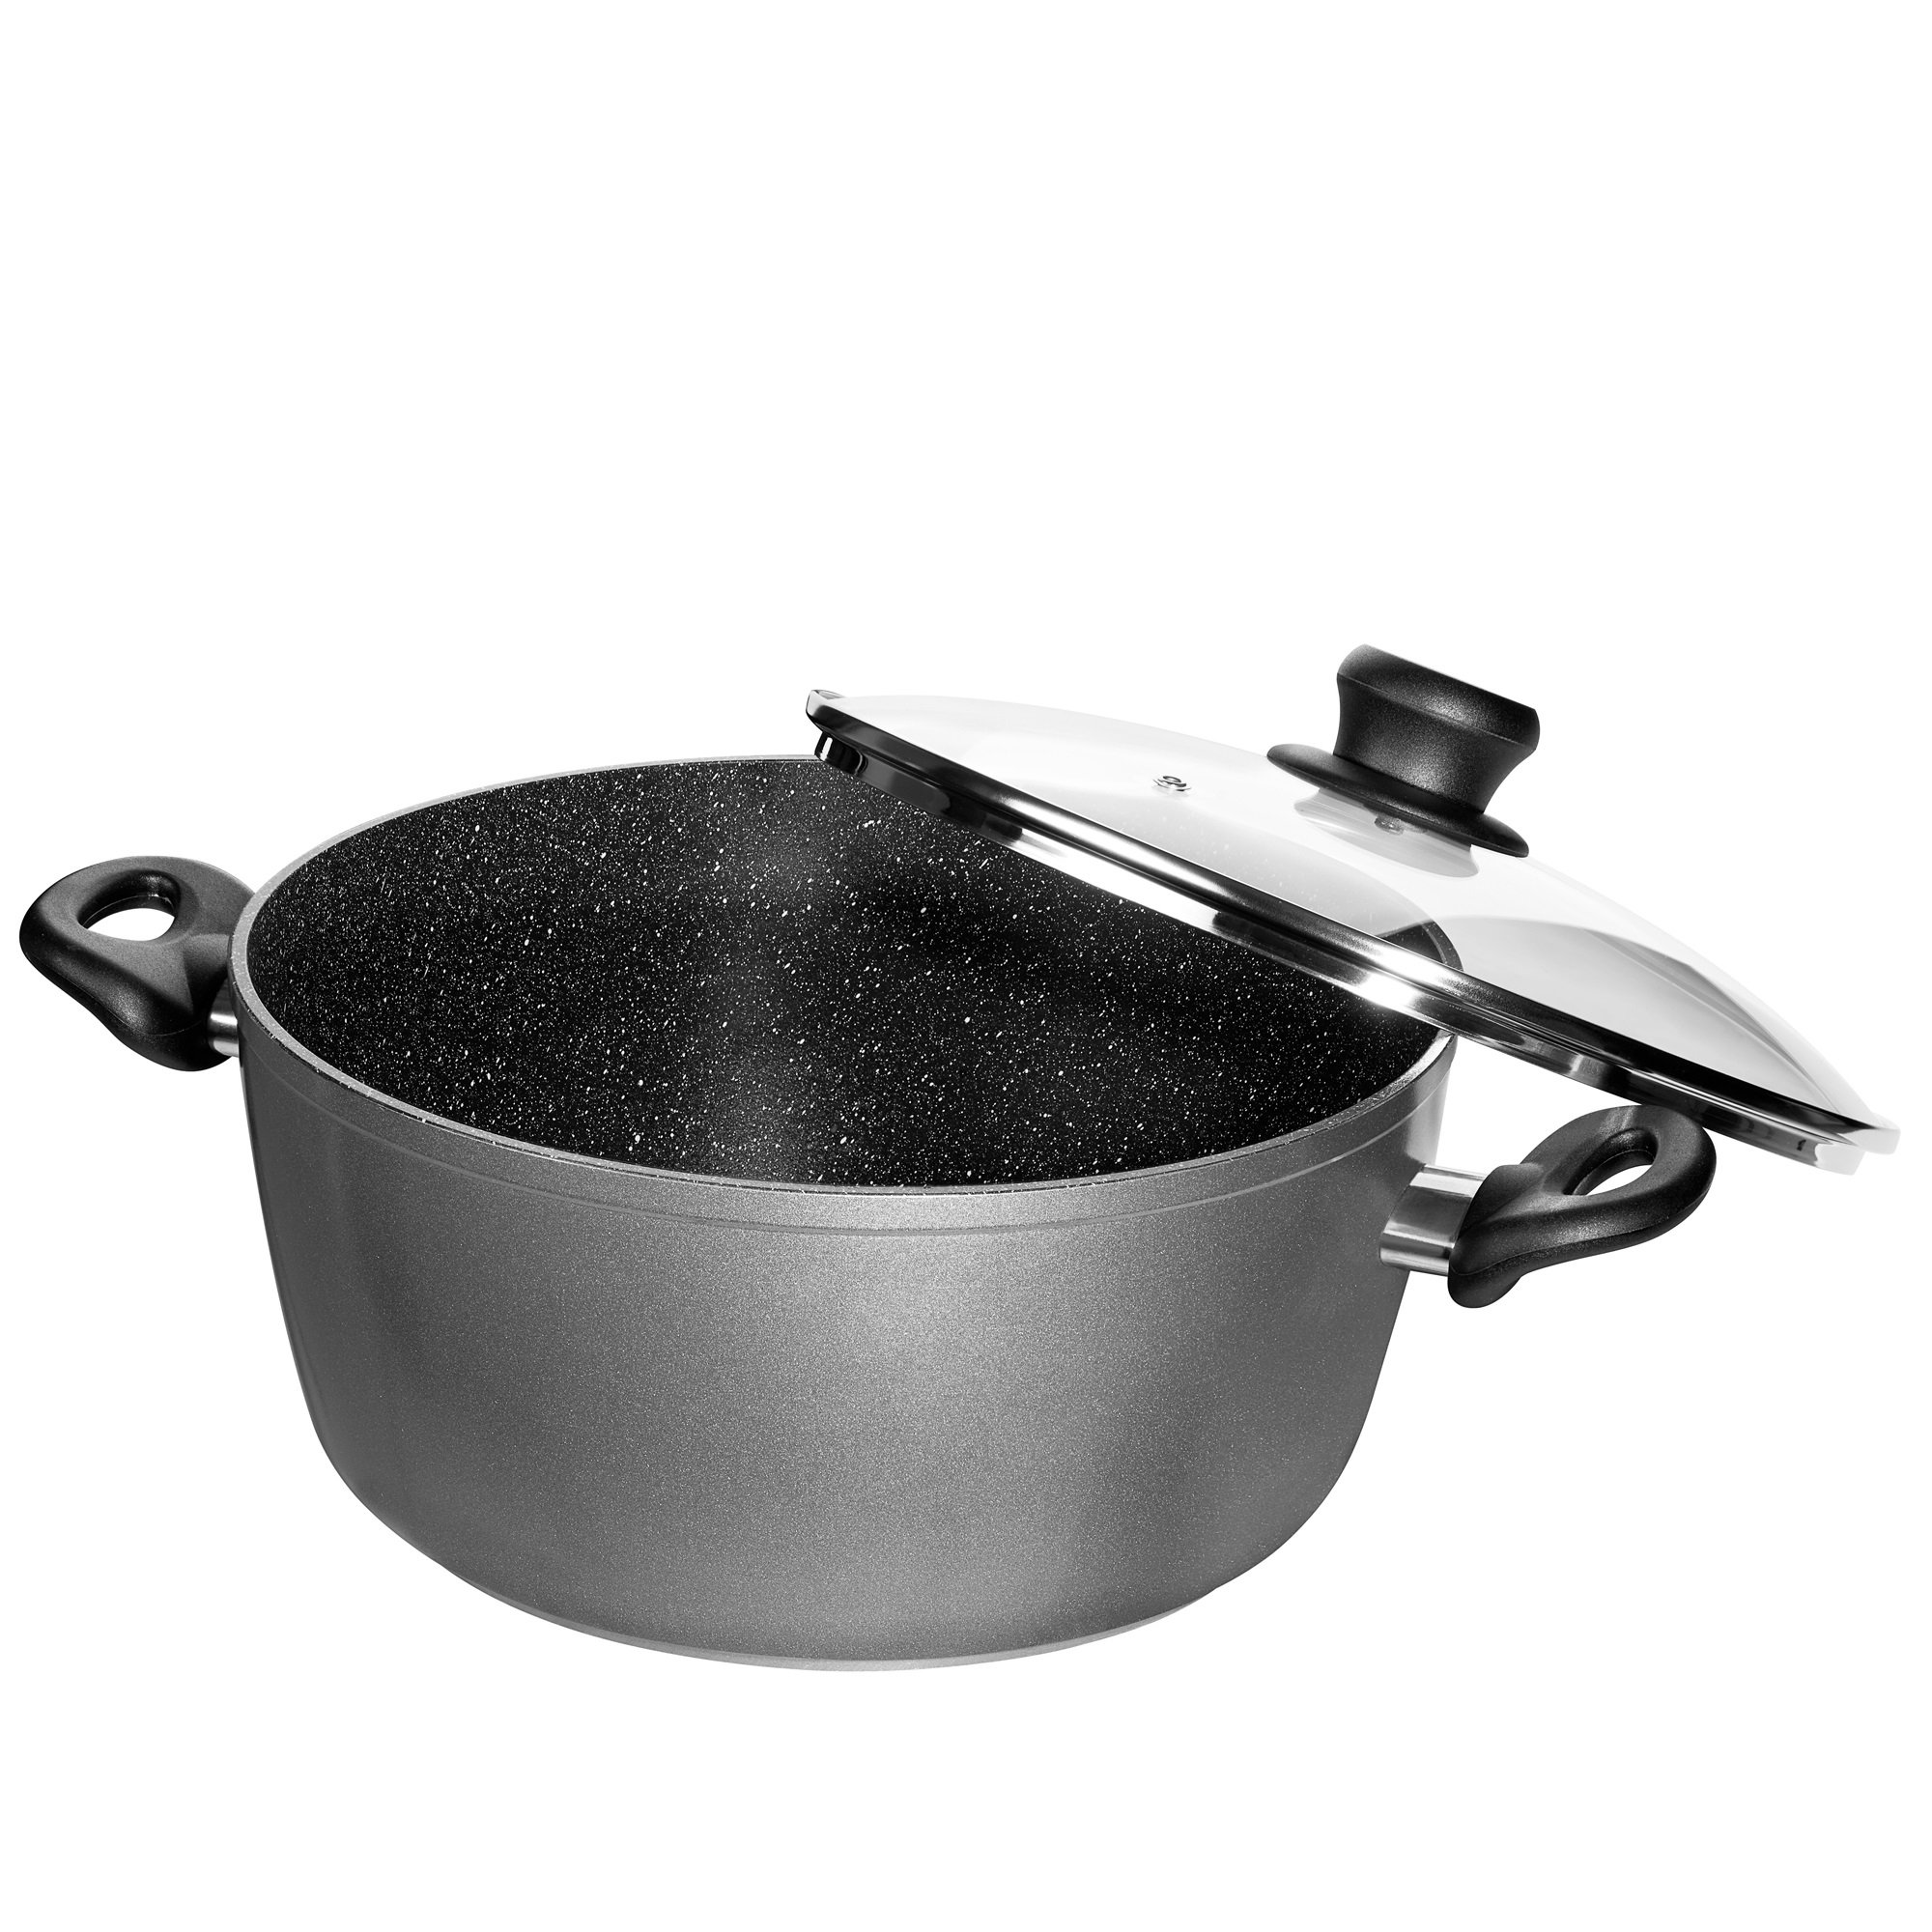 STONELINE® Cooking Pot 24 cm, with Lid, Large Non-Stick Pot | Made in Germany | CLASSIC